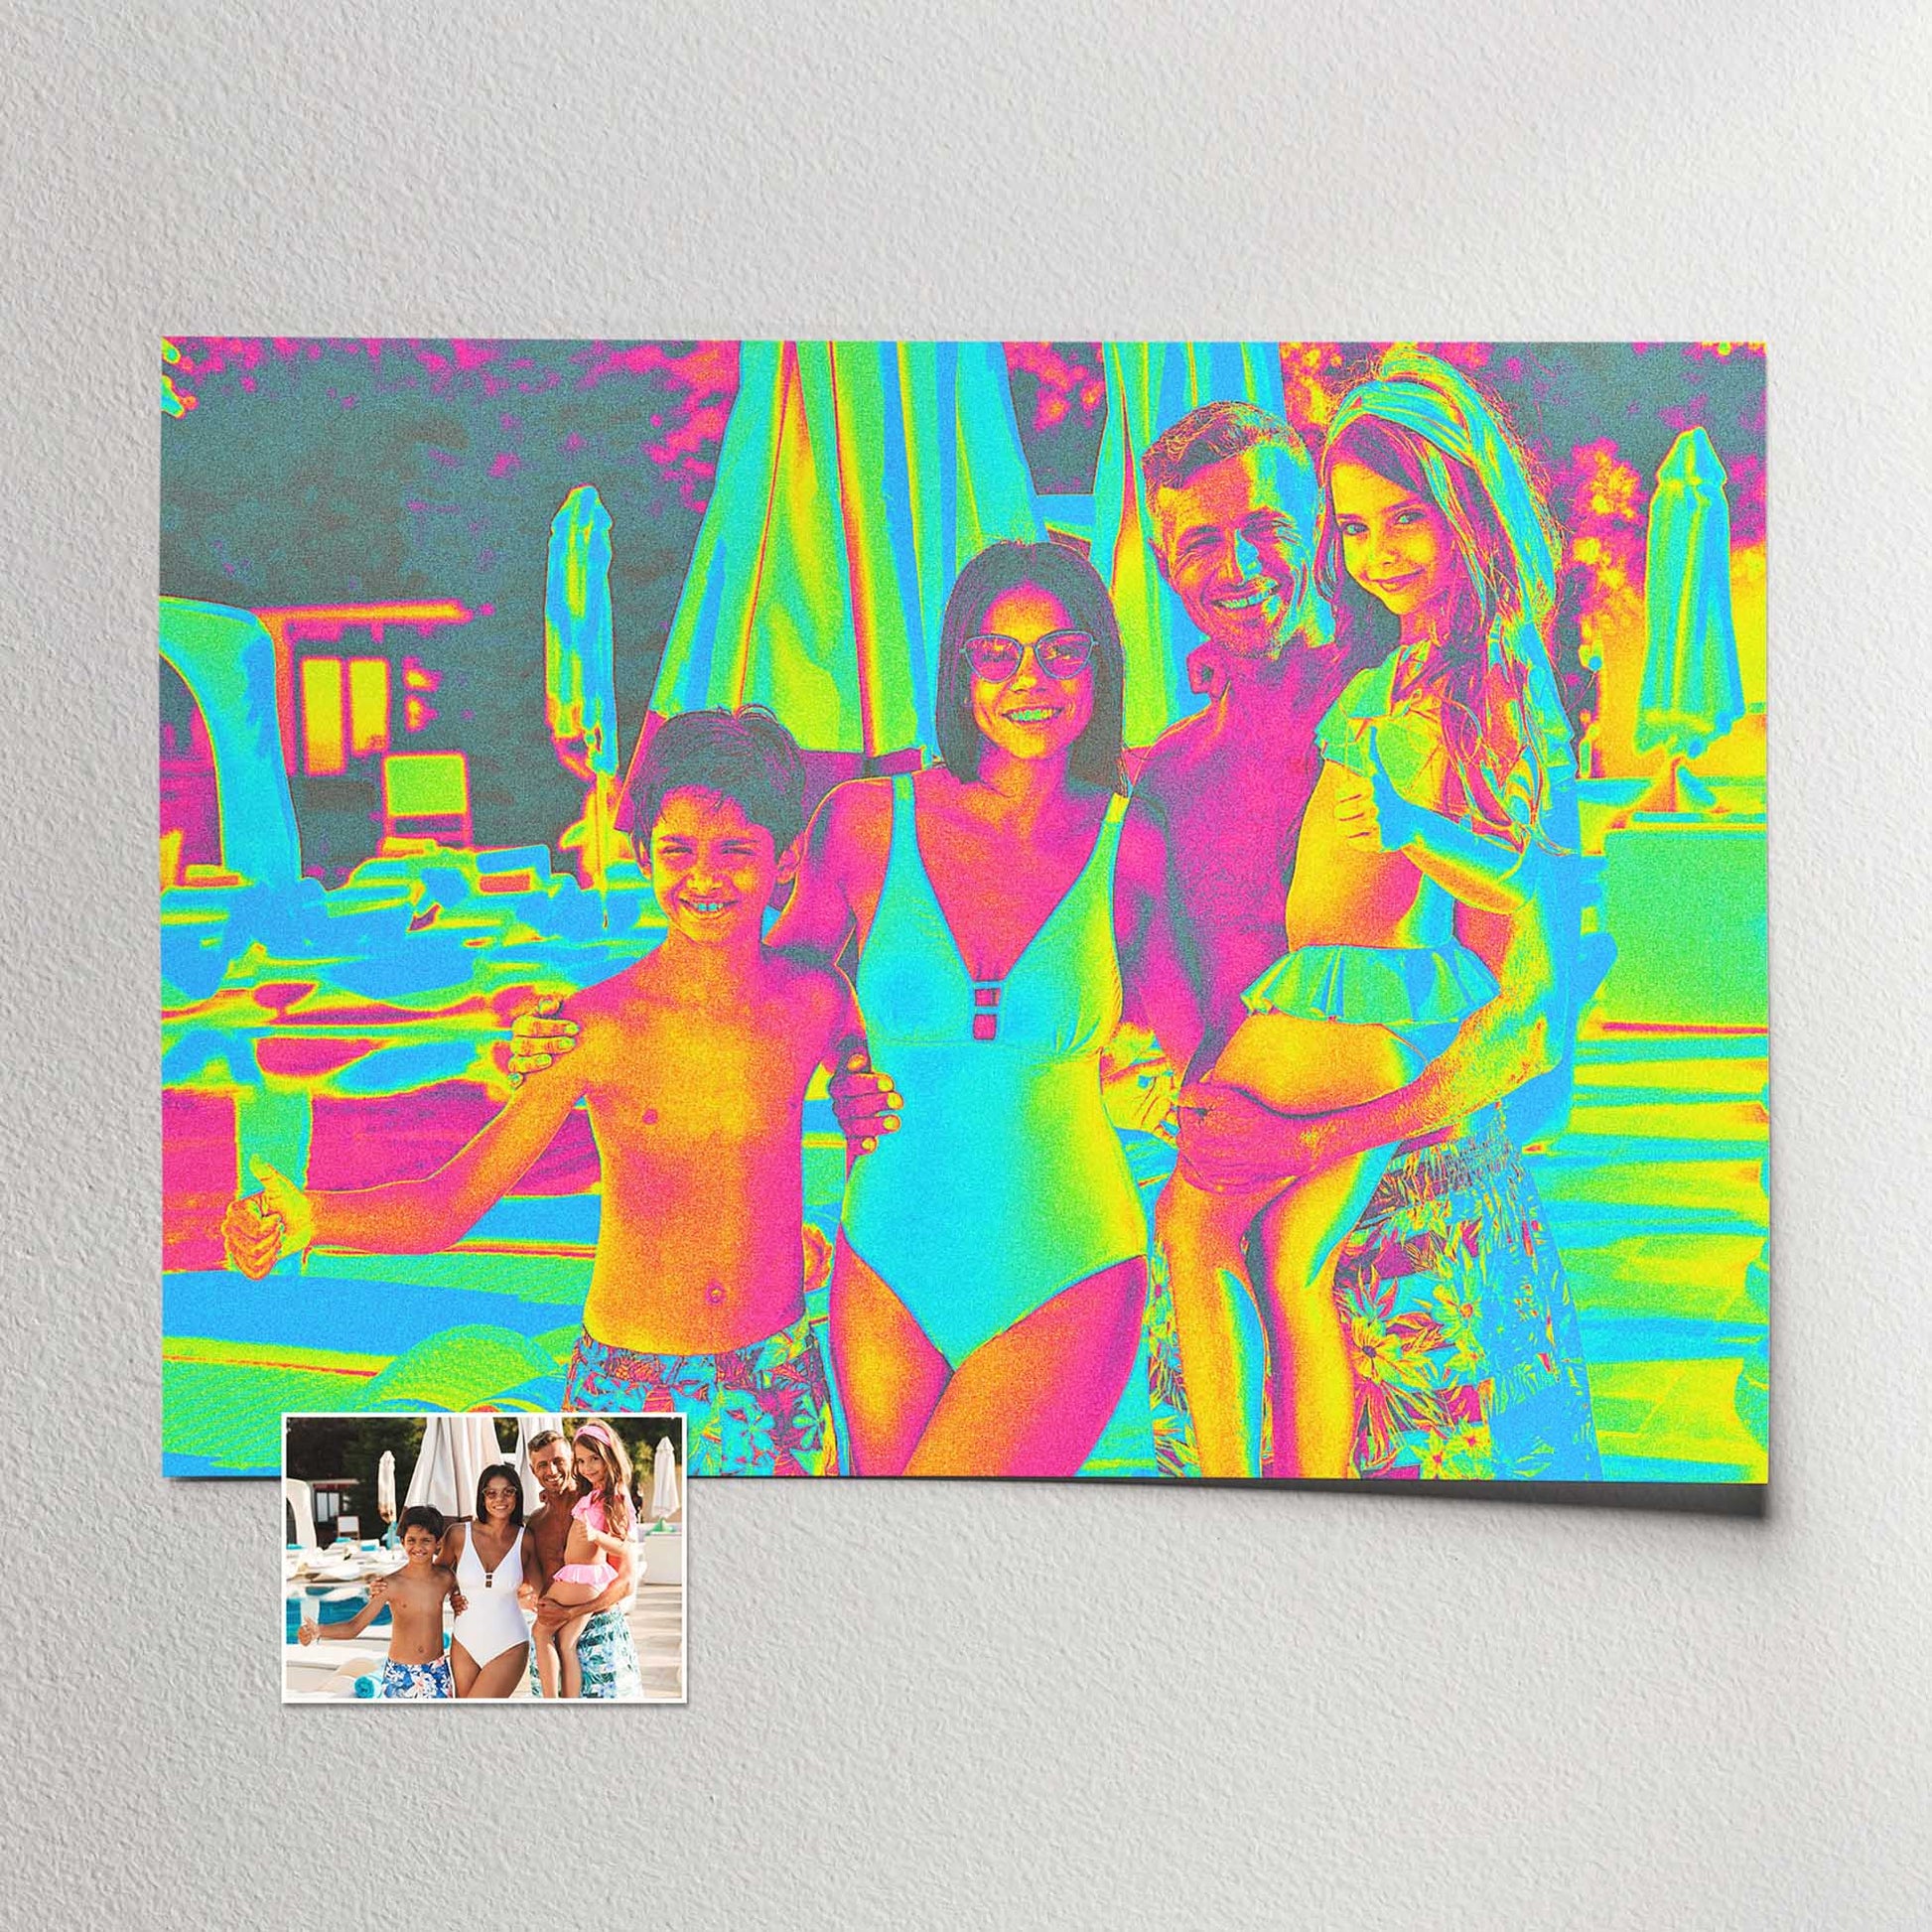 Transform your walls into a celebration of colors with our Personalised Acid Trip Print. Crafted from your photo, this neon-colored masterpiece boasts a vibrant mix of yellow, green, pink, and blue tones